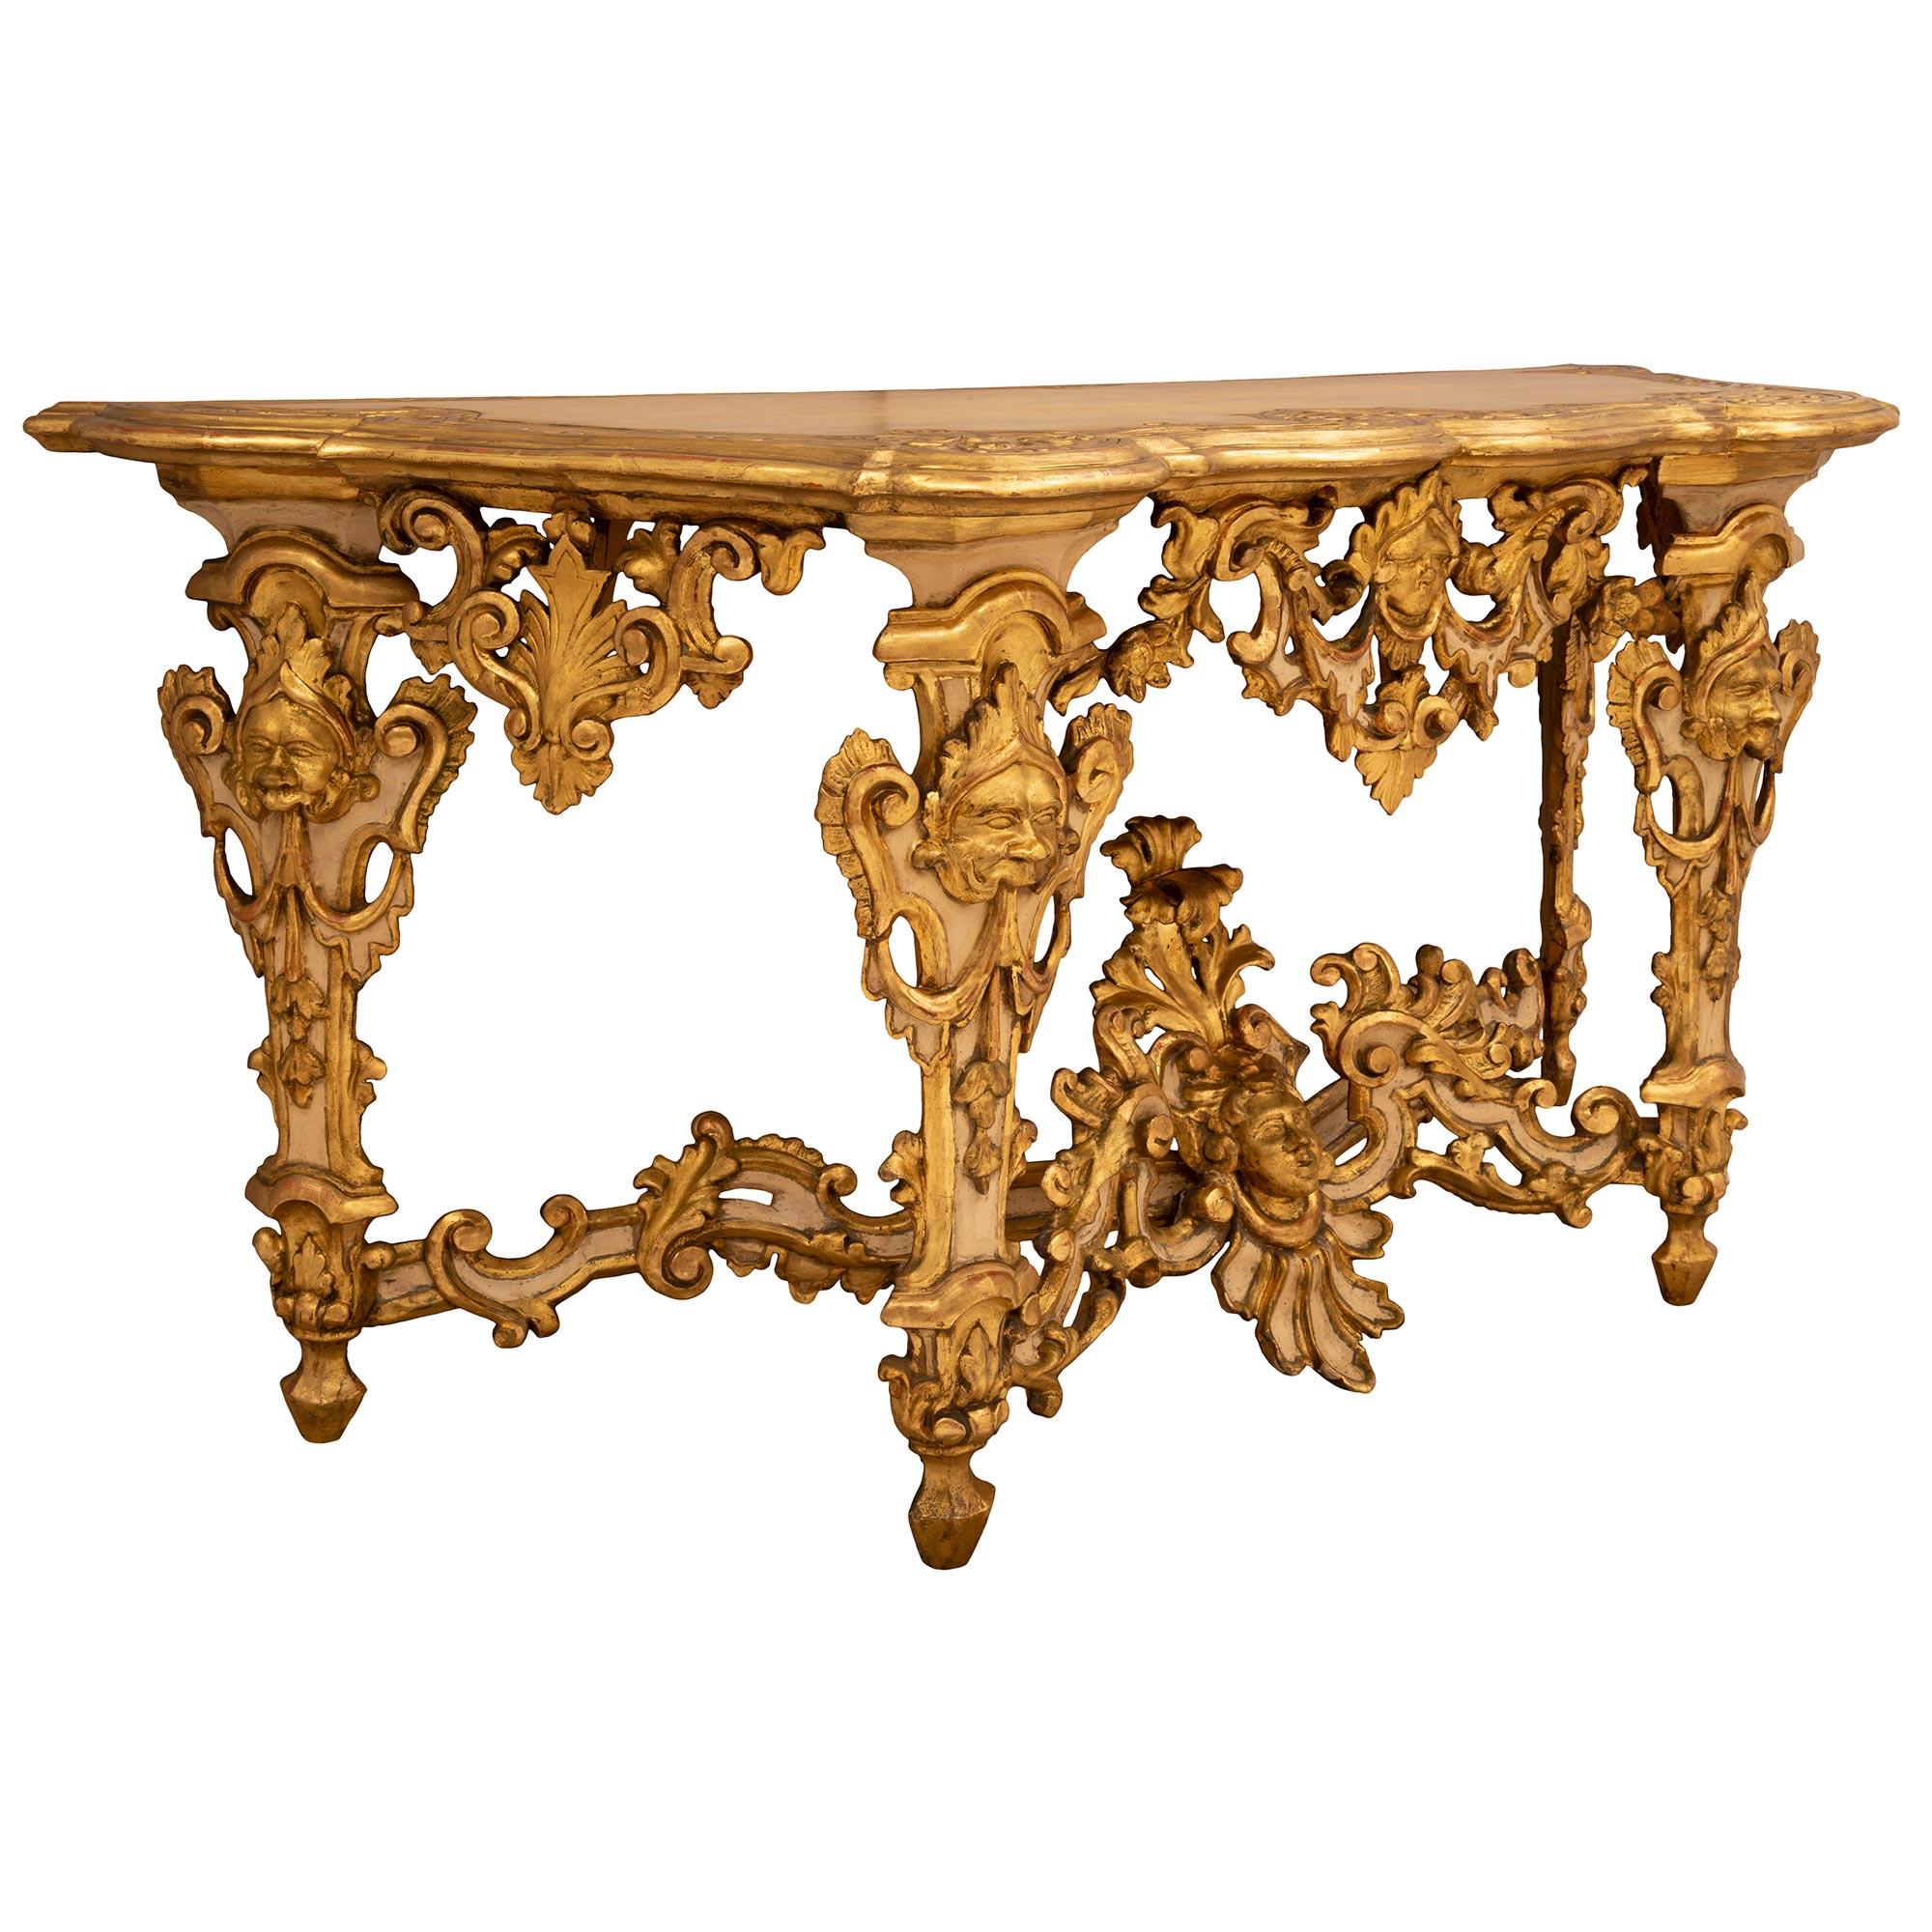 Italian 18th Century Louis XIV Period Giltwood and Patinated Wood Lombardi Conso In Good Condition For Sale In West Palm Beach, FL